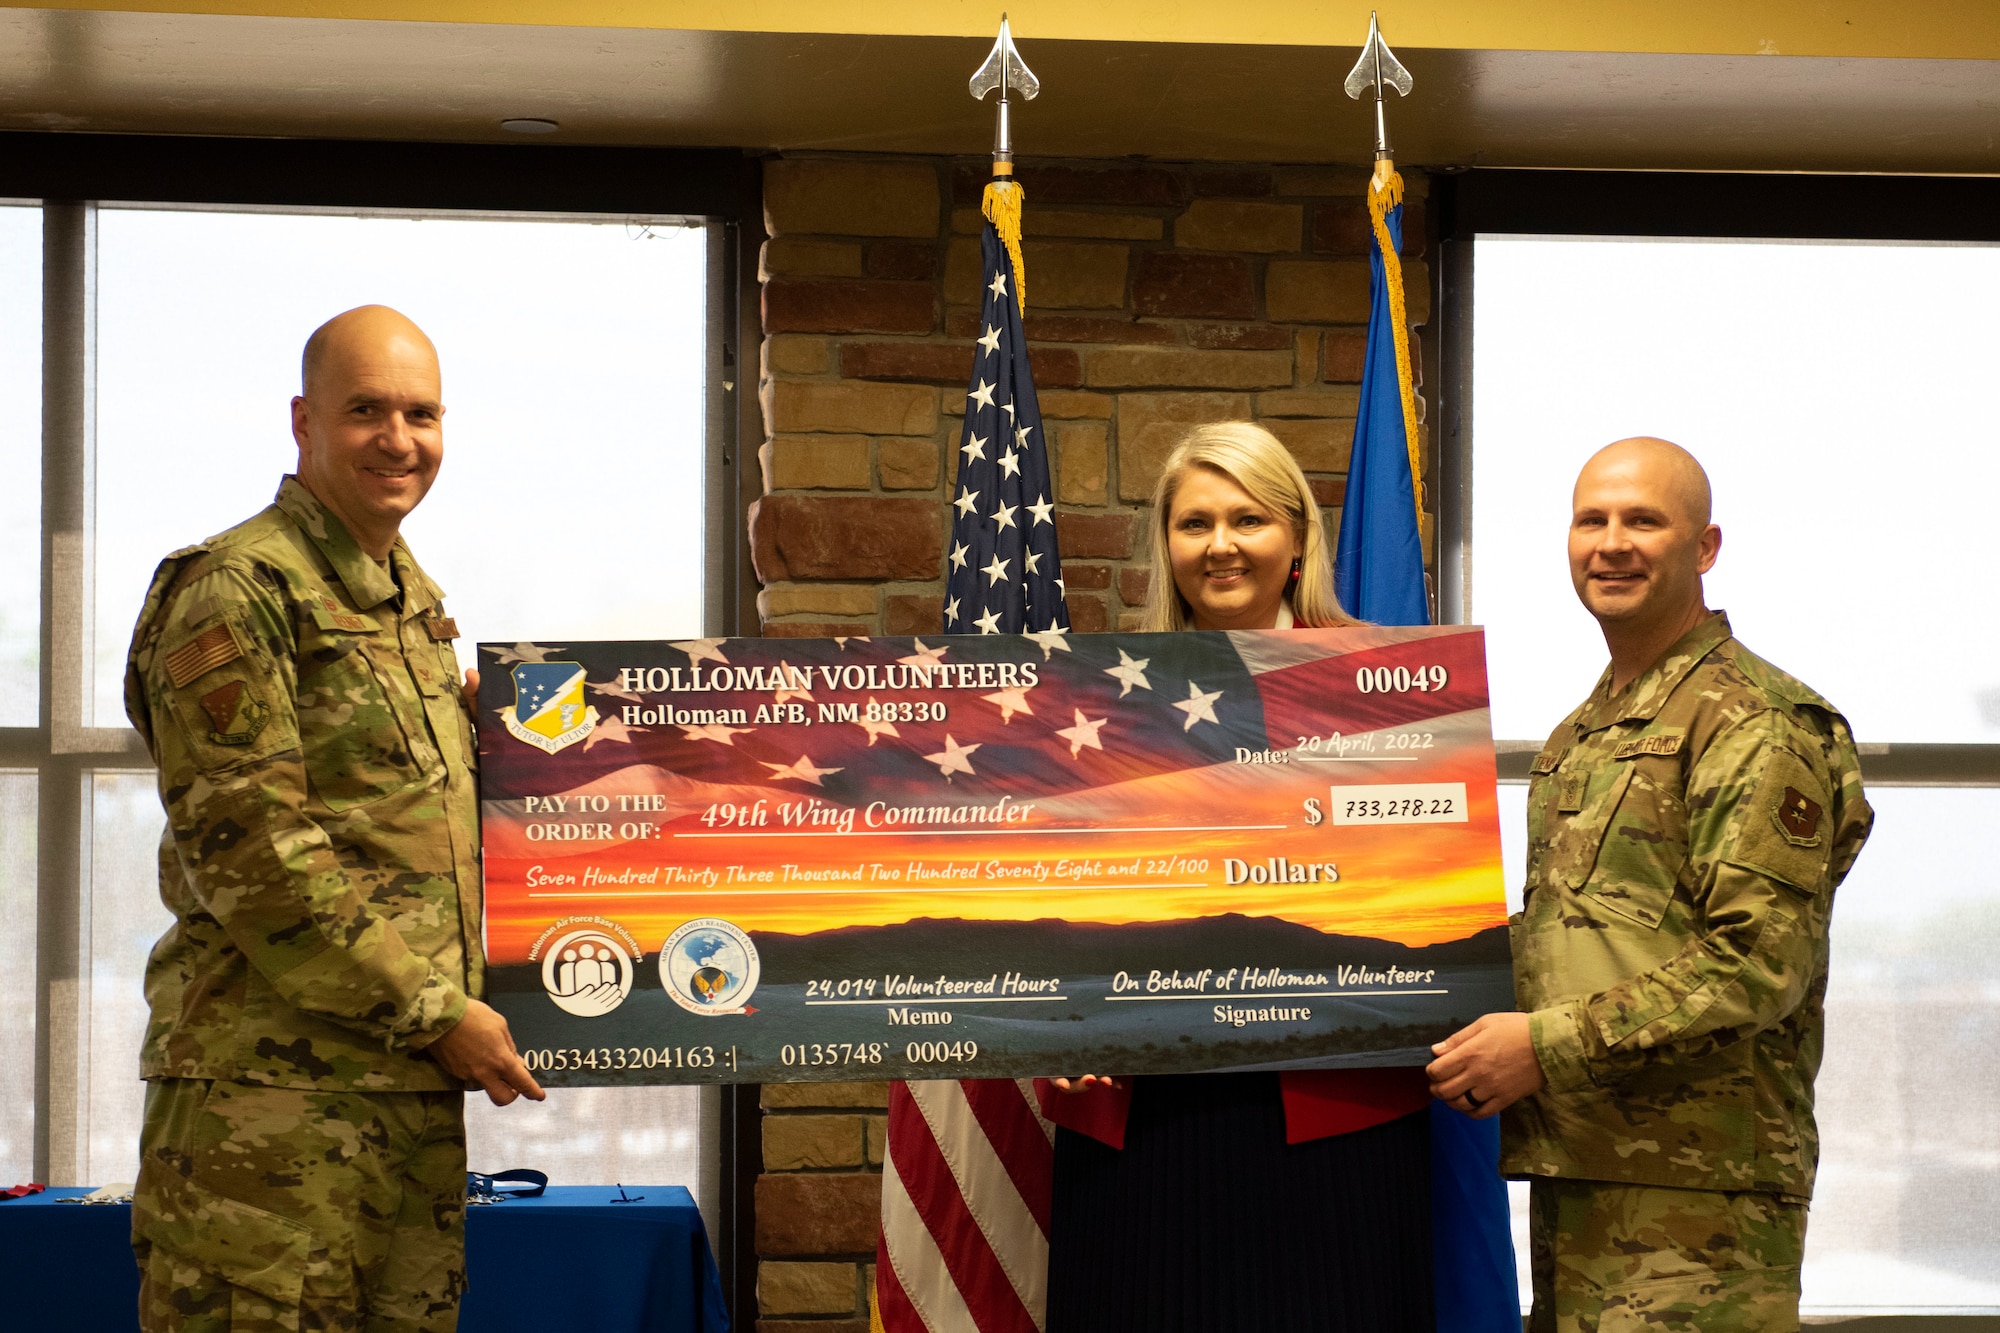 Col. Ryan Keeney 49th Wing commander, Chief Master Sgt. Thomas Temple, 49th Wing command chief and Julie Franklin, Airman & Family Readiness Center flight chief, pose together with a check for 733,278.22 dollars during a volunteer awards ceremony in Club Holloman April 20, 2022, on Holloman Air Force Base, New Mexico. The check represents the total value of dollars raised for all the volunteer hours for this year. (U.S. Air Force photo by Airman Isaiah Pedrazzini)